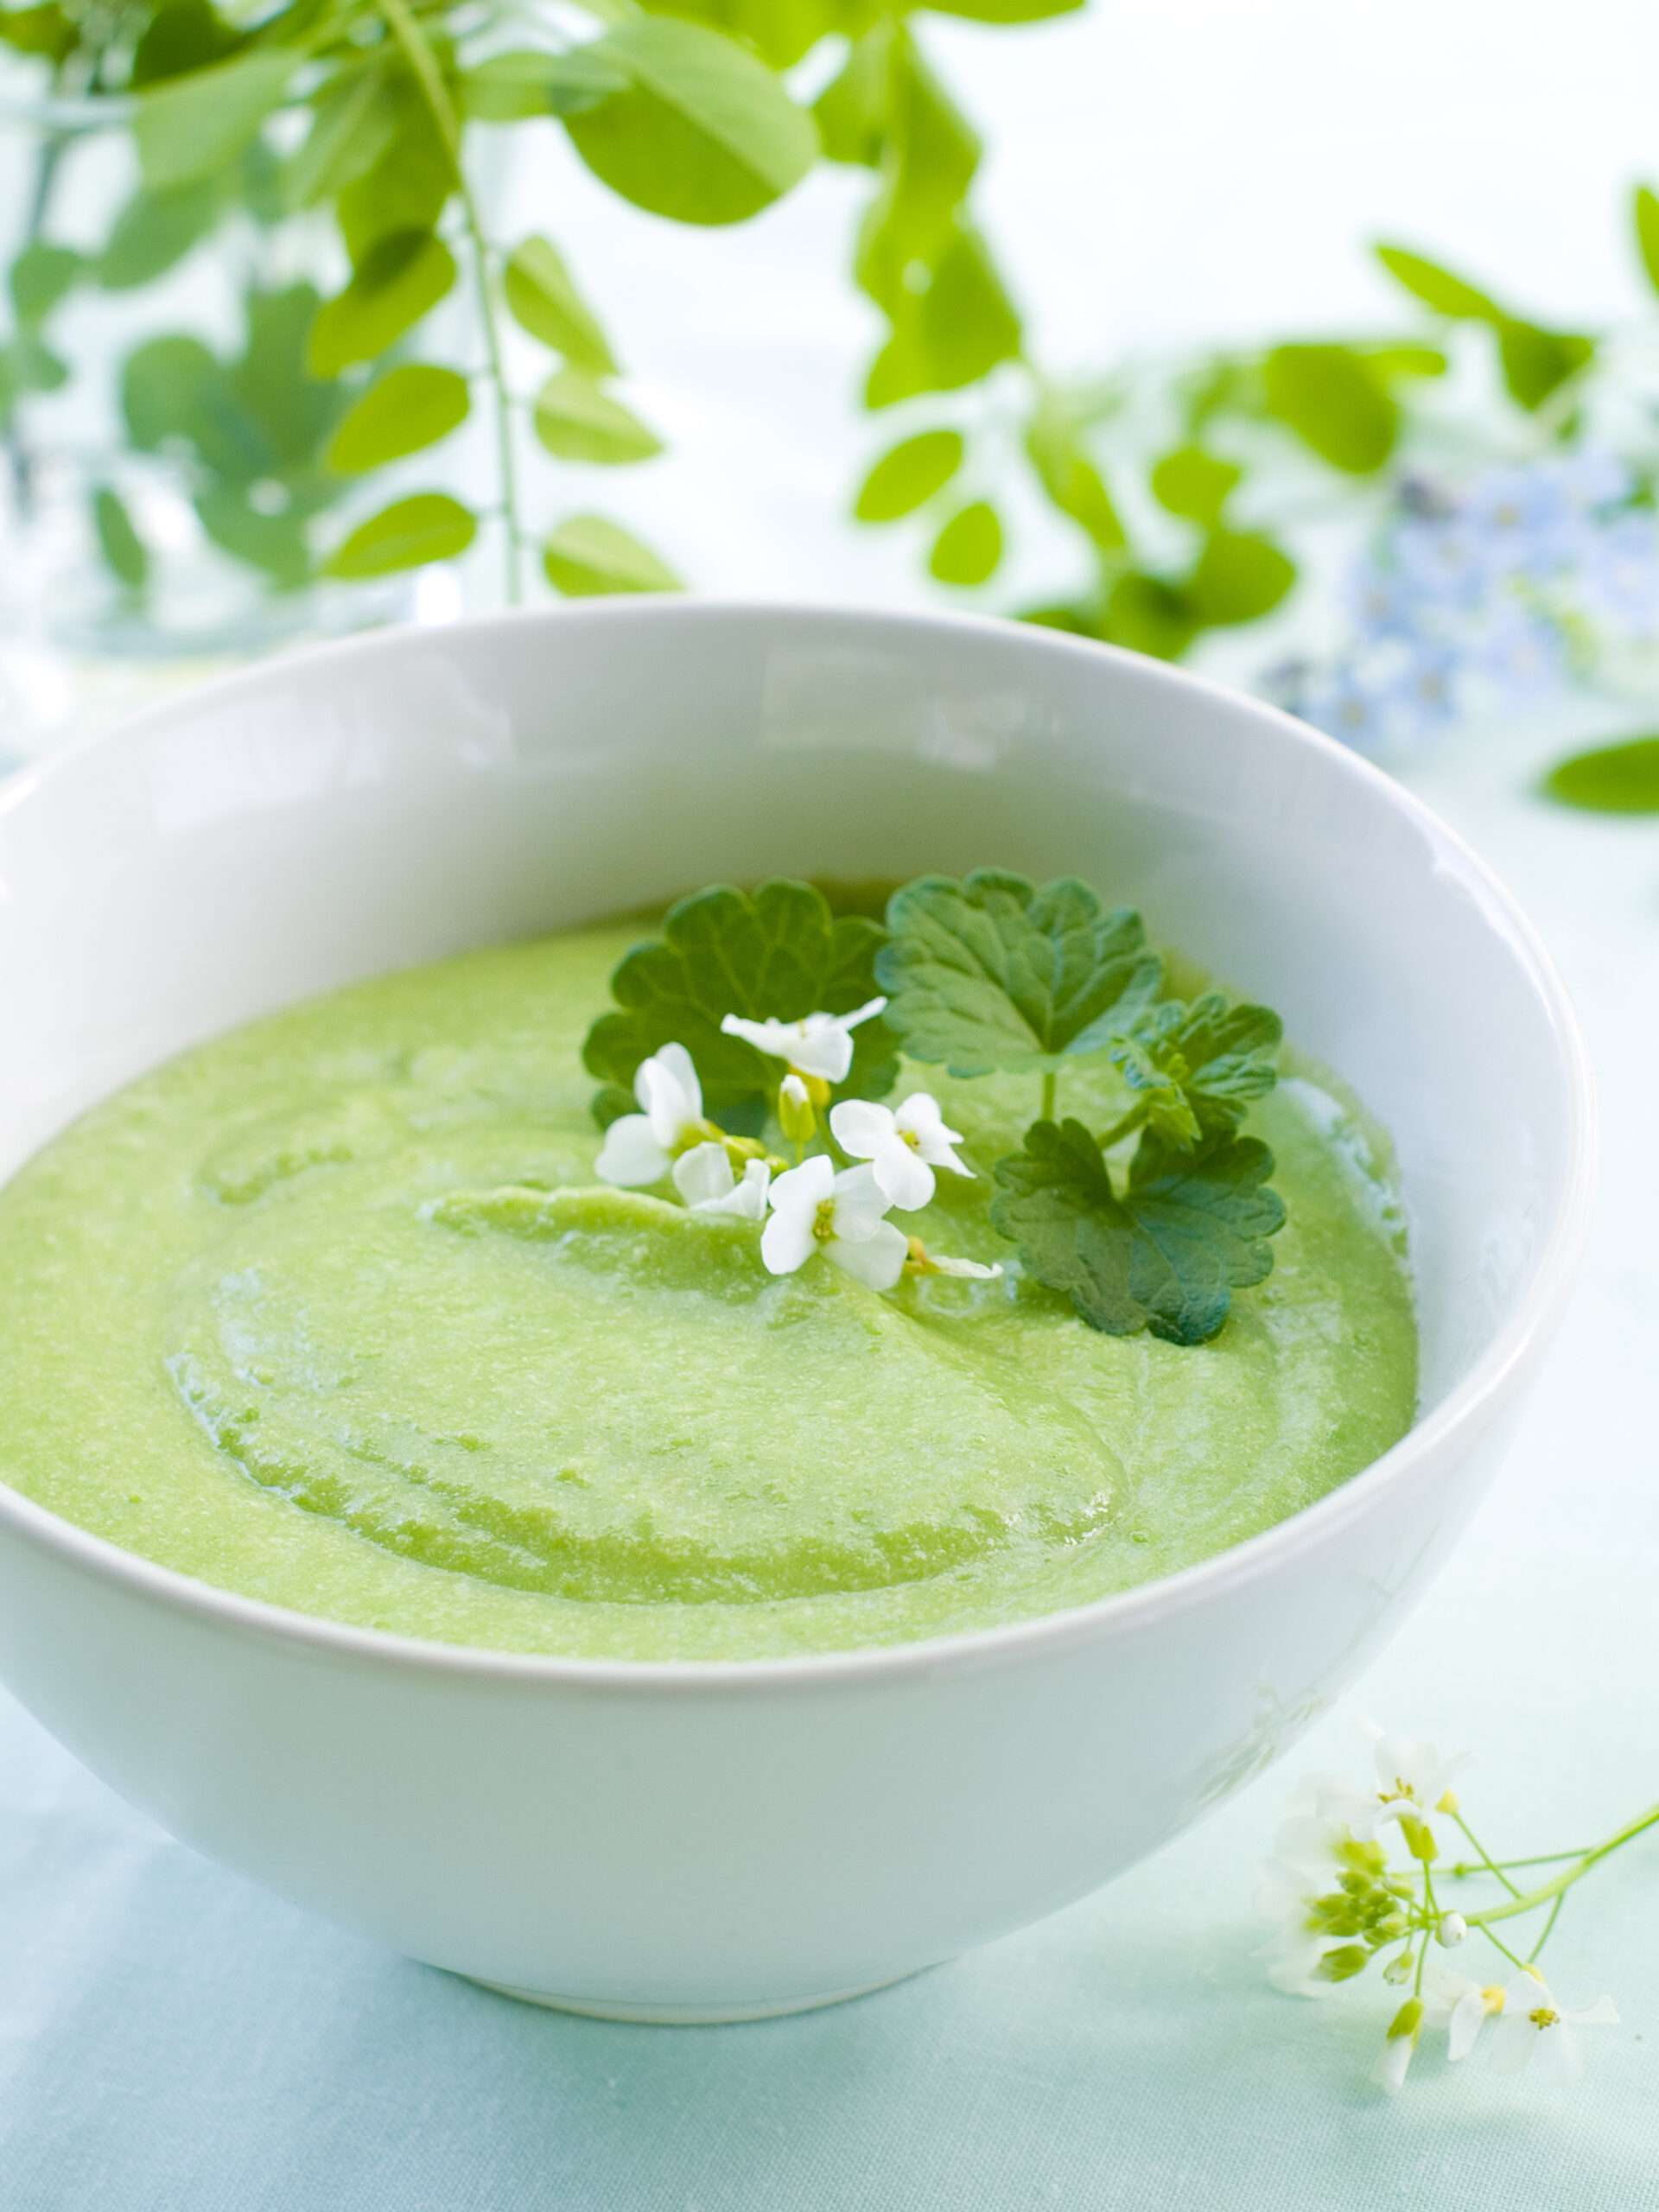 Pea cream soup with cilantro flower as a garnish in white bowl on a table with decorative cilantro flower